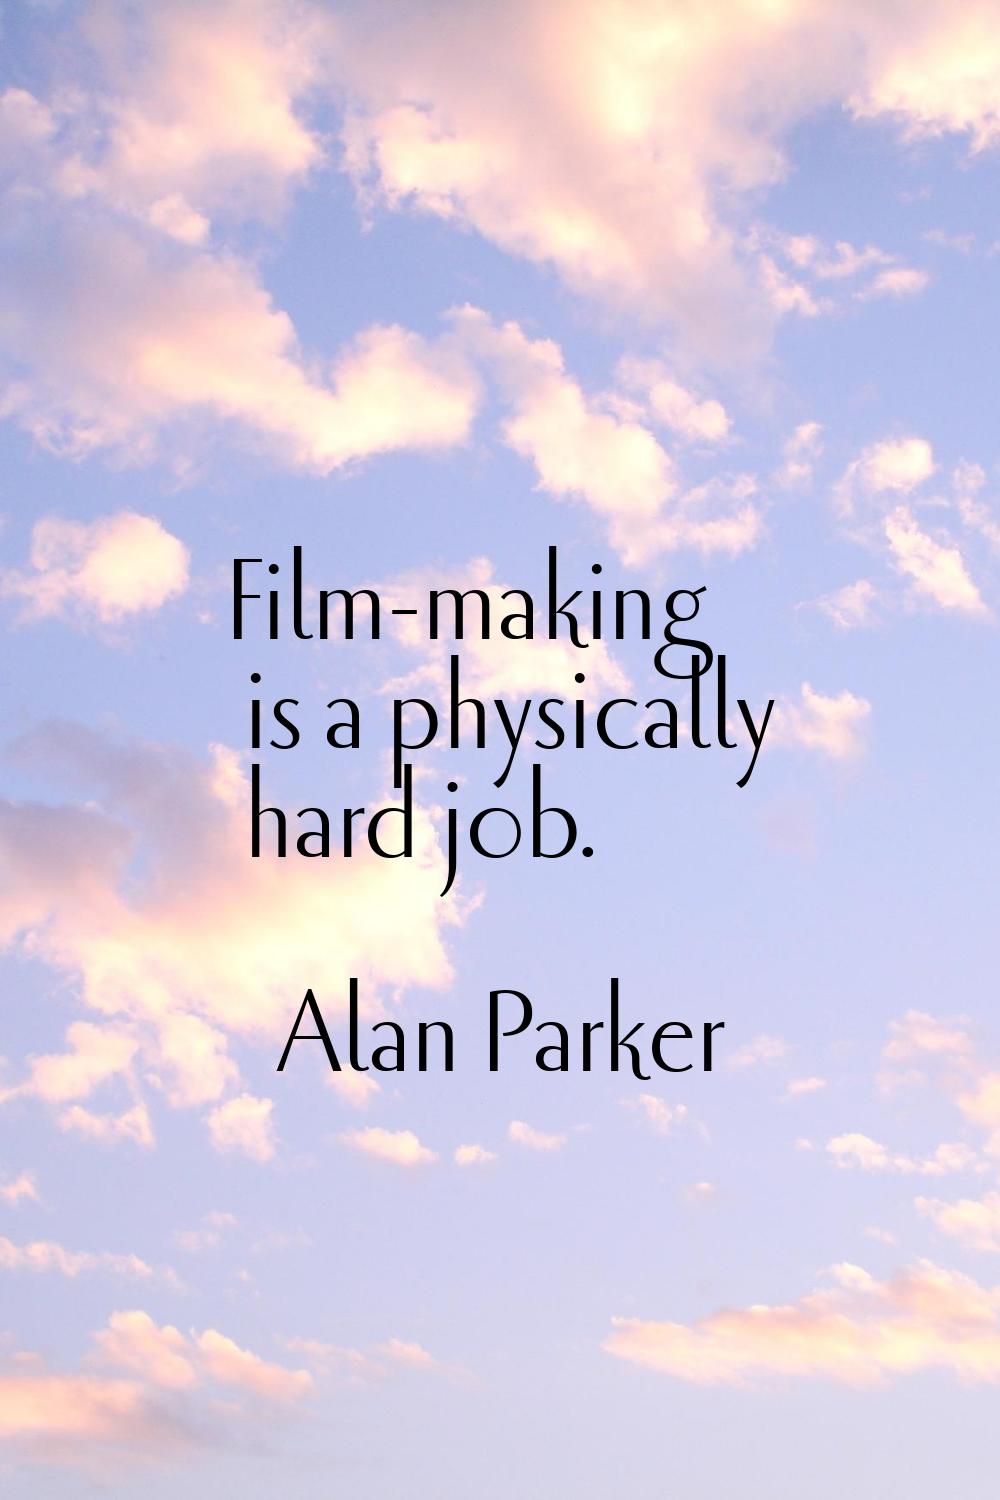 Film-making is a physically hard job.